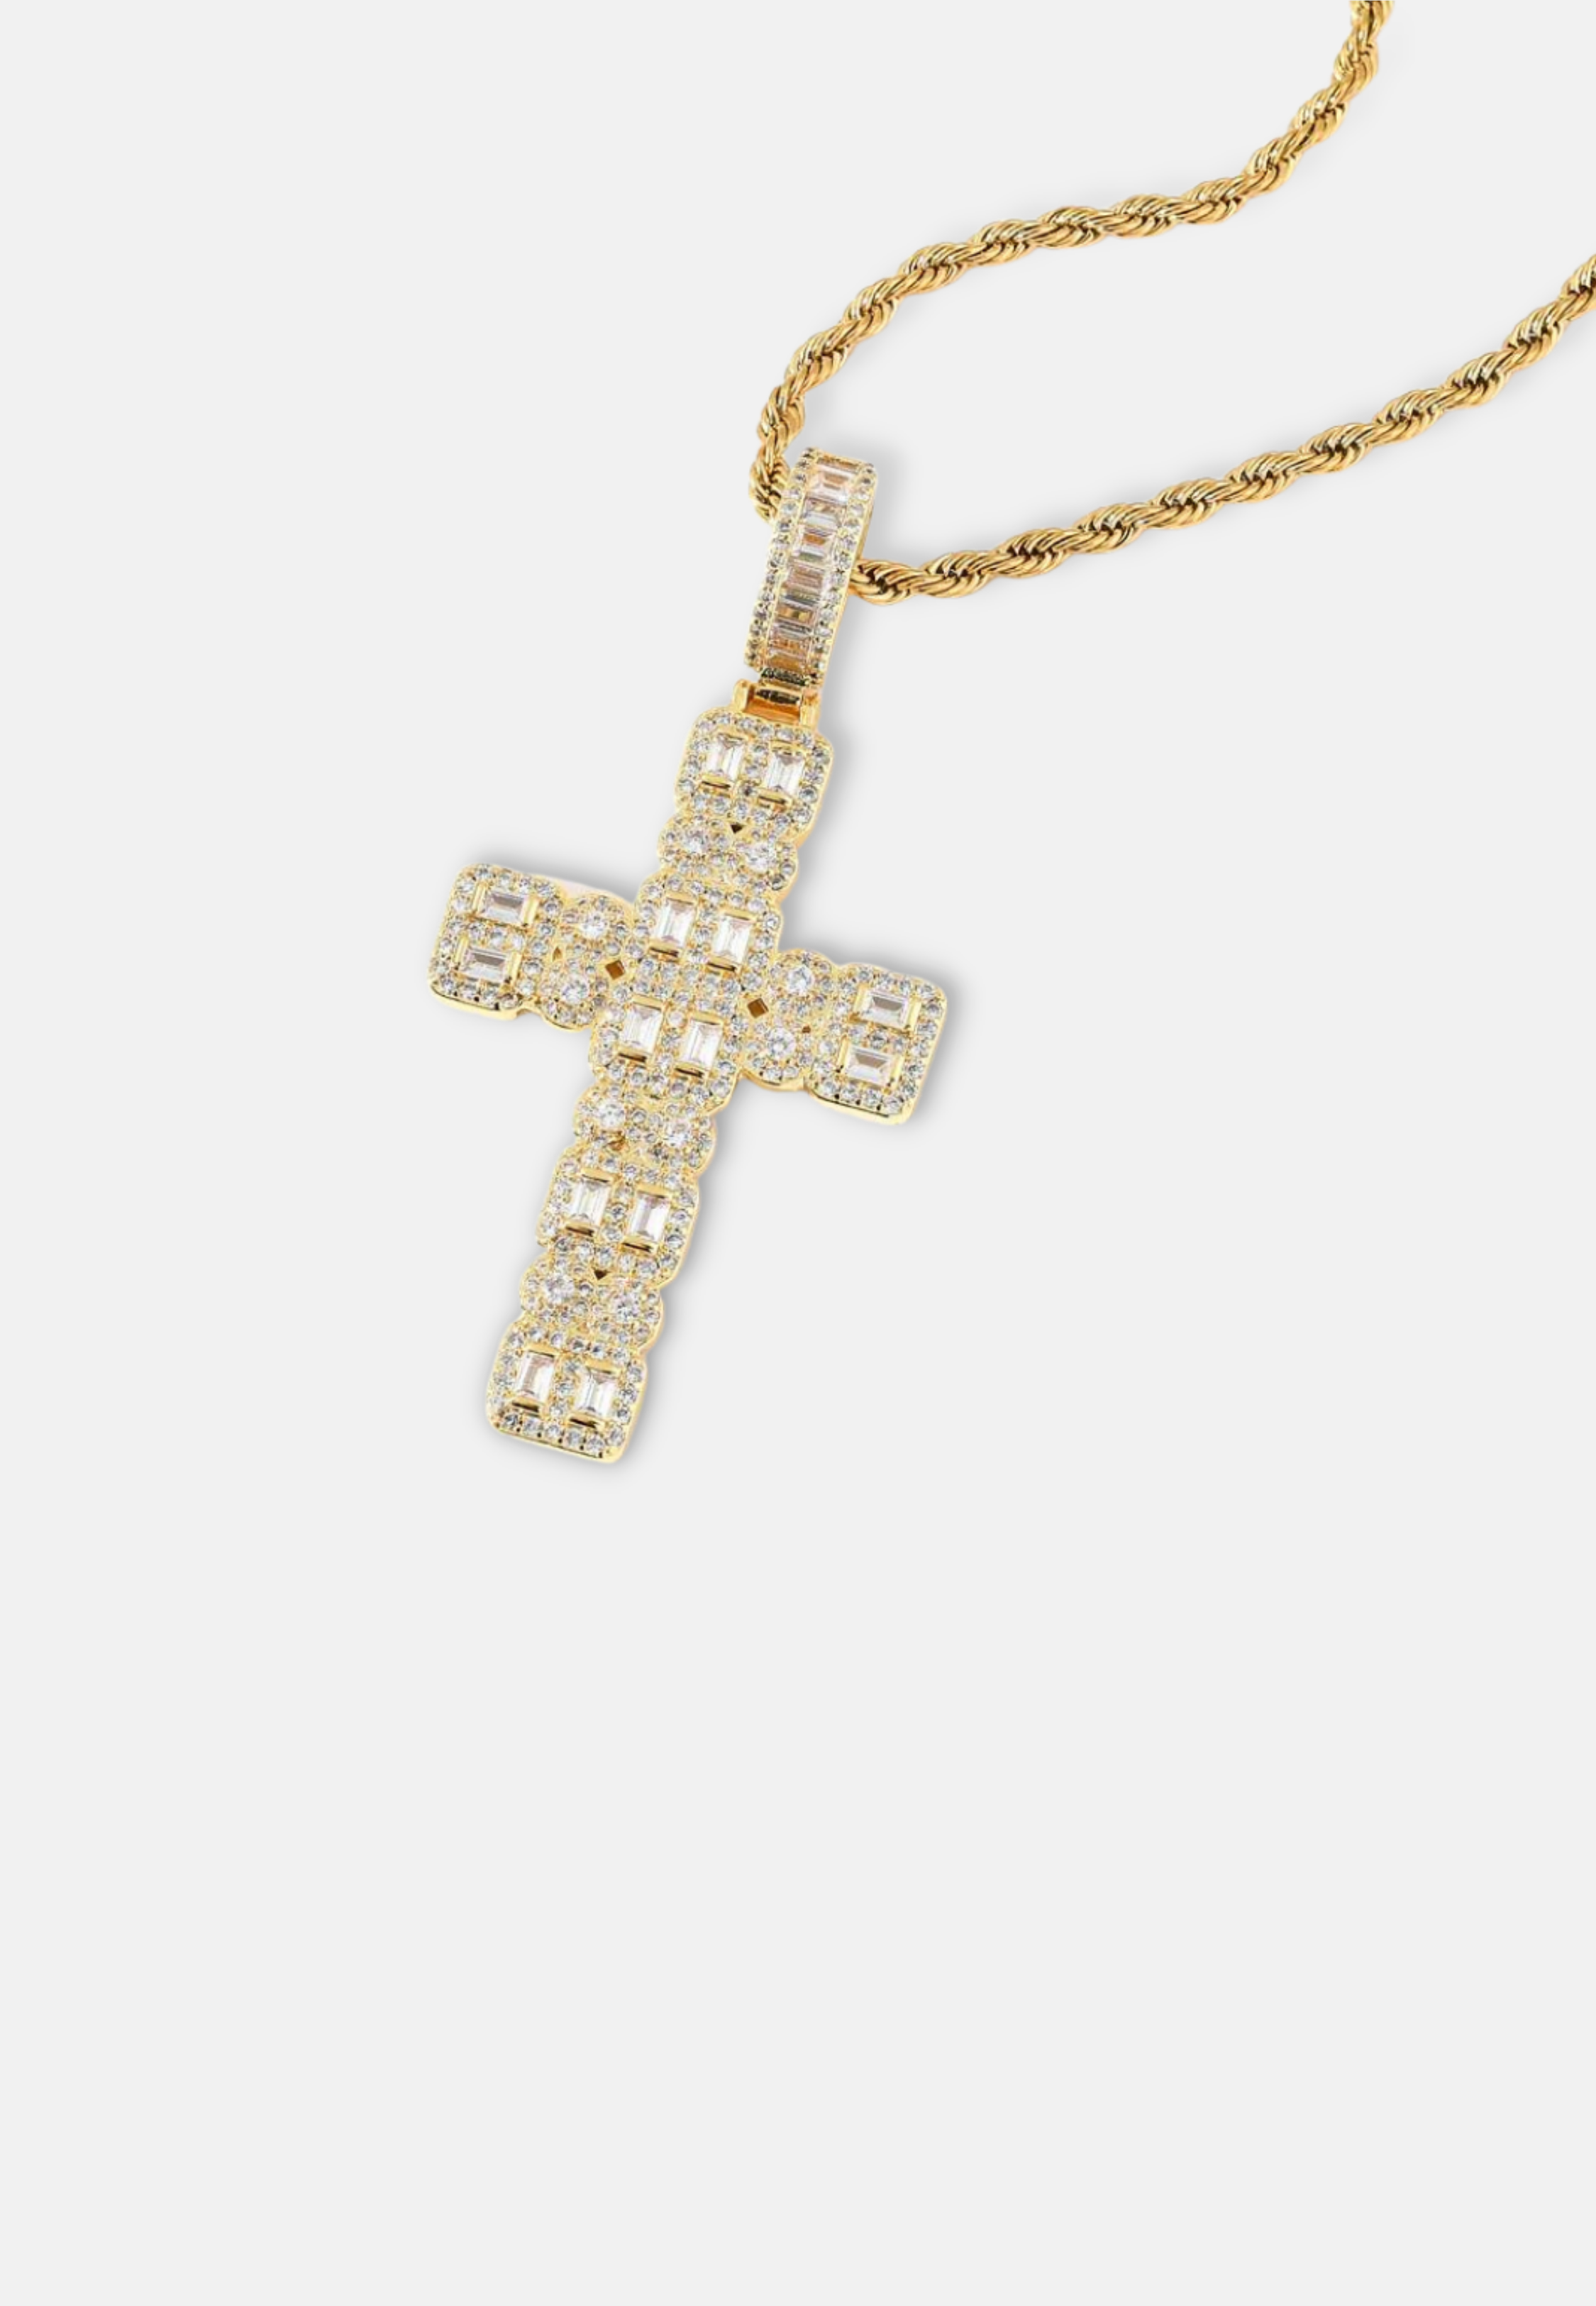 Hillenic Gold Iced Mixed Cross Pendant, absolute best seller in hip hop jewelry industry lying on the white surface